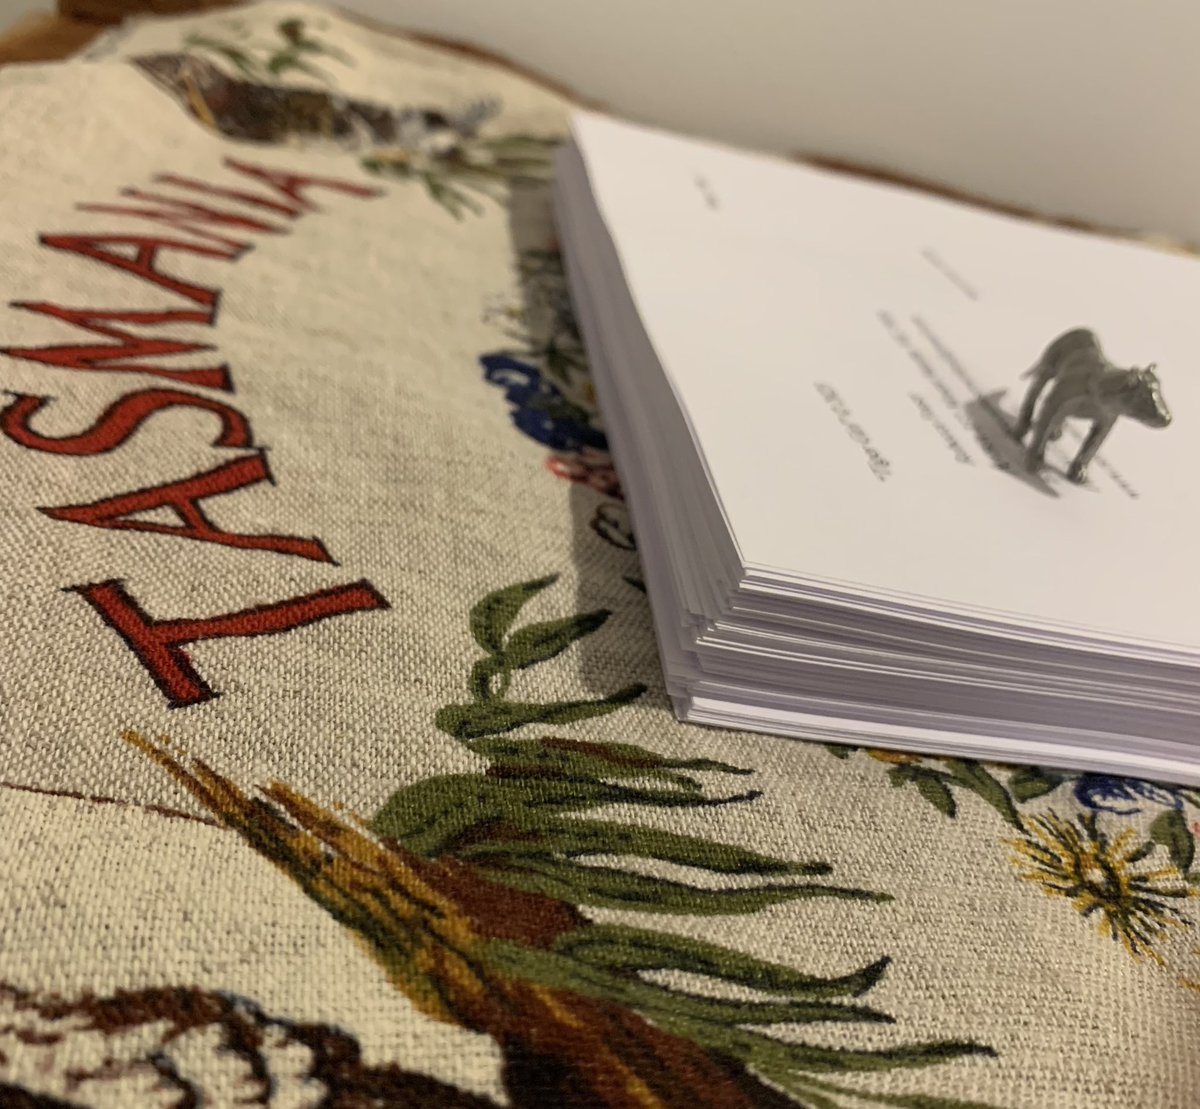 This is what #theend on the current #loveozmg #wip looks like. This book is a love letter to my beloved #tasmania Publishers, I believe in this story, I’m putting in the polish, and I’ll be knocking on your door soon!
#tigergirl #thylacine #tasmaniantiger #thriller #eco #survival